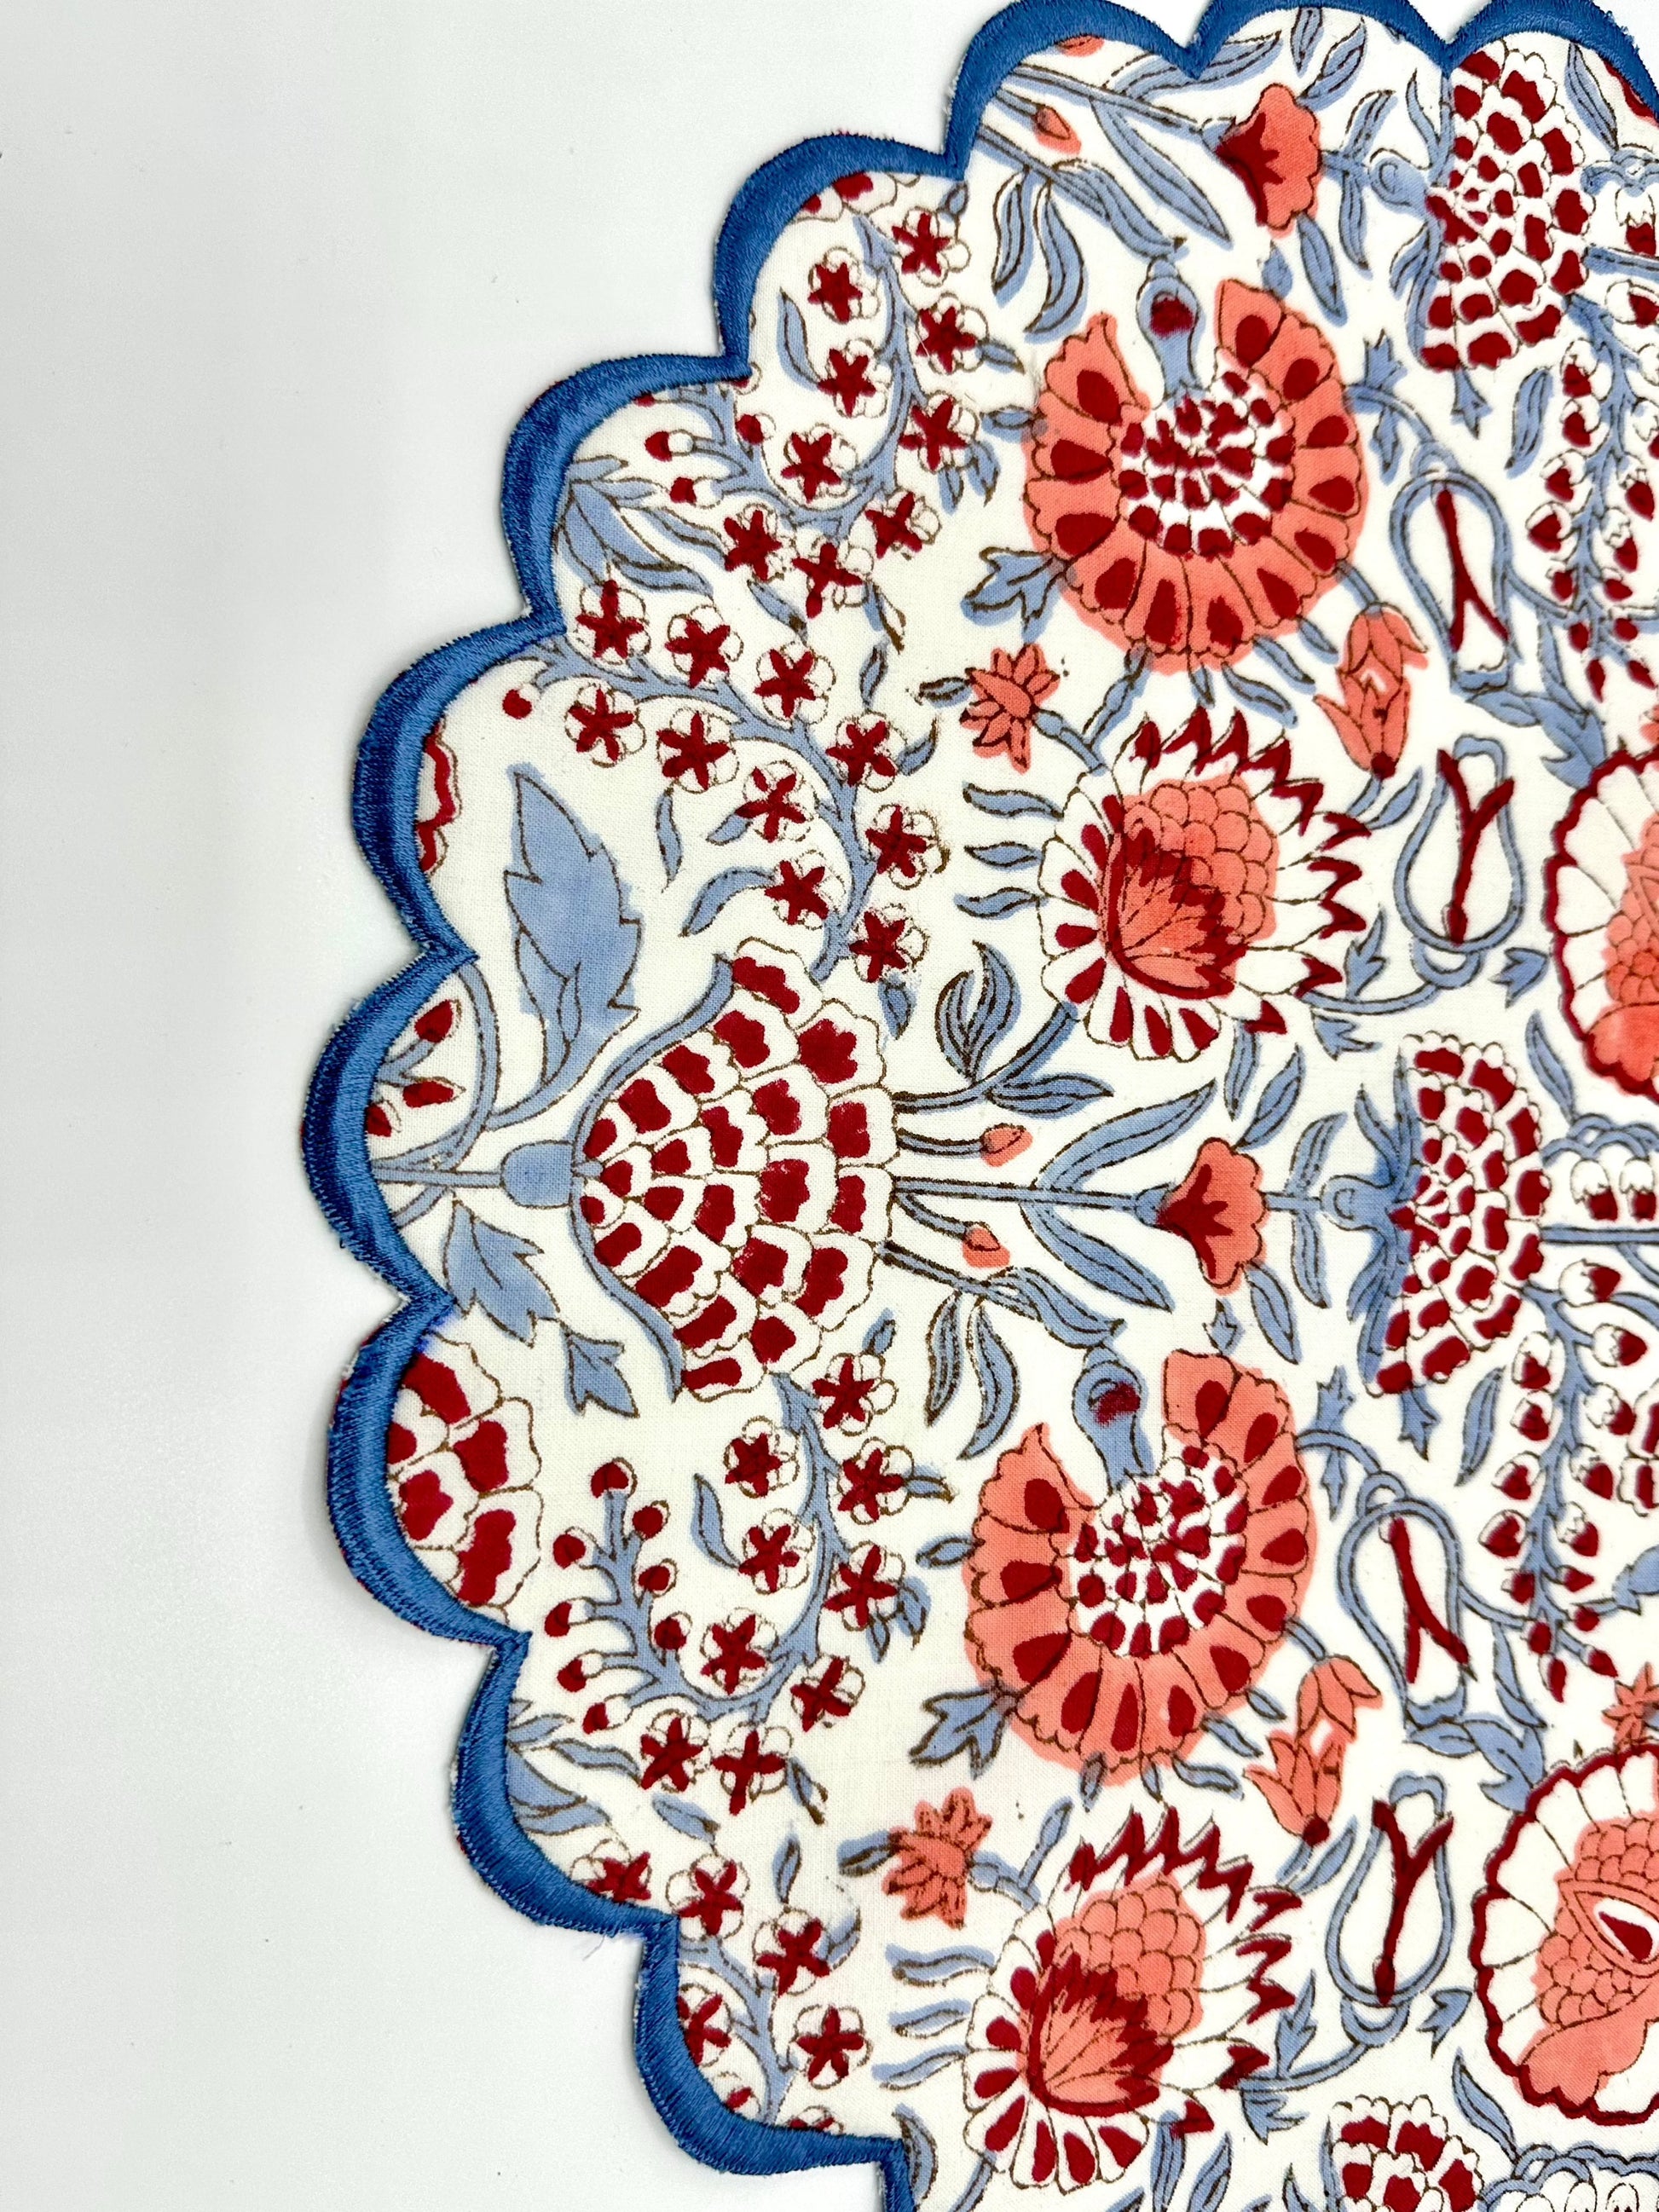 Set of 4 I Red & Blue Round Scalloped Edge Embroidered Placemat I Table Mats I Cotton Placemat I Table Linen I Tablecloth - DharBazaar